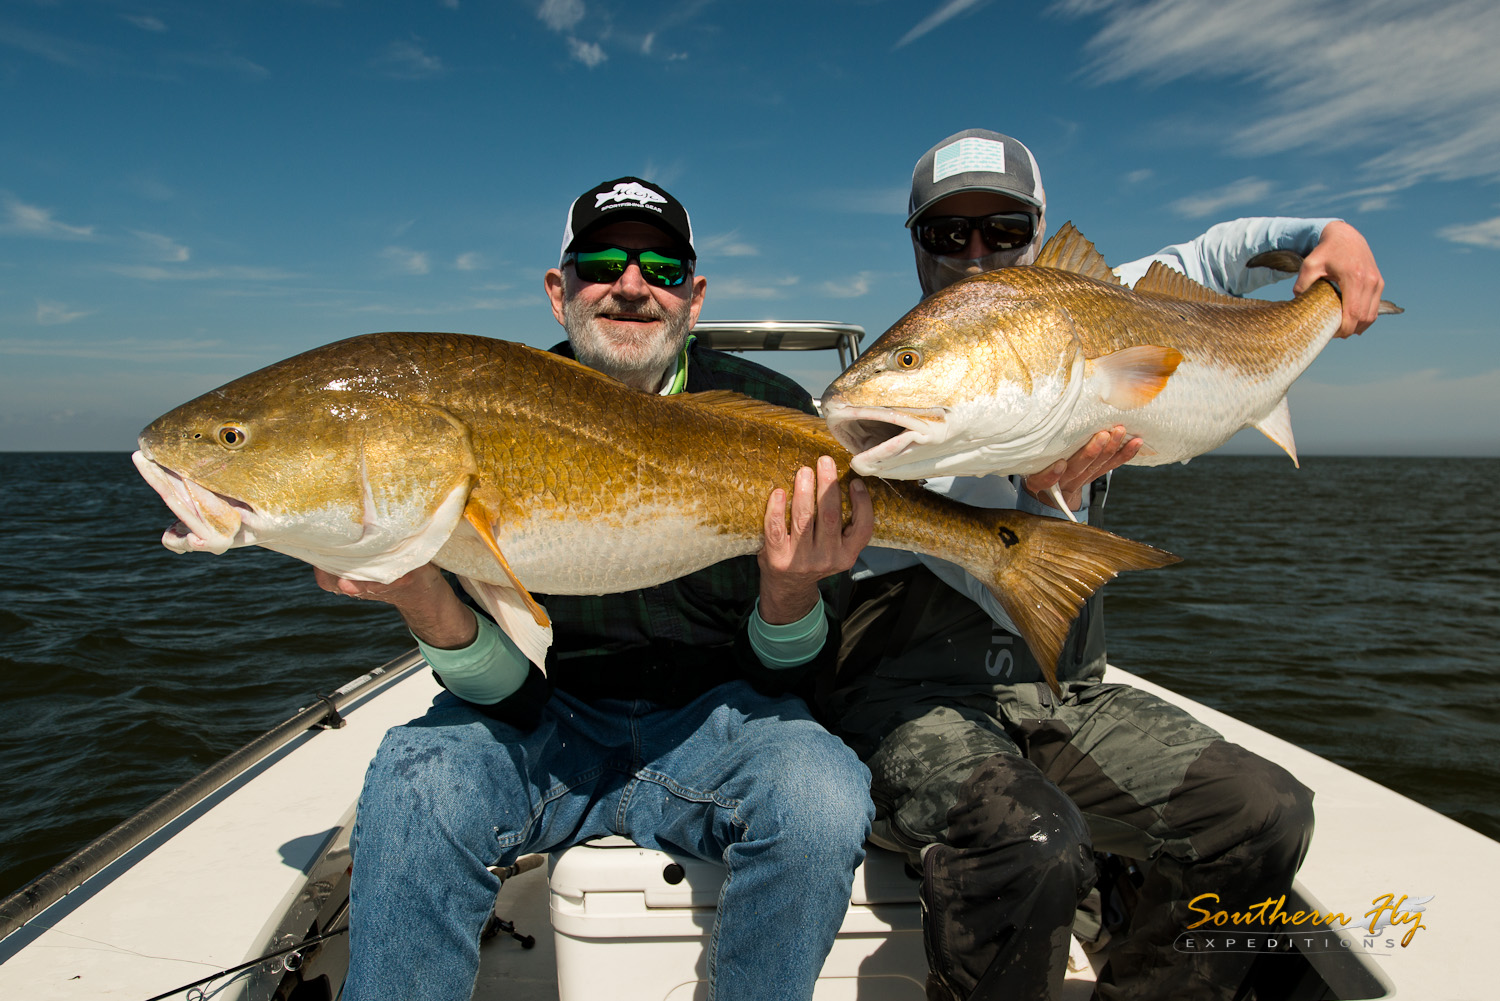 2019-02-07_SouthernFlyExpeditions_NewOrleans_StephenGrover-3.jpg